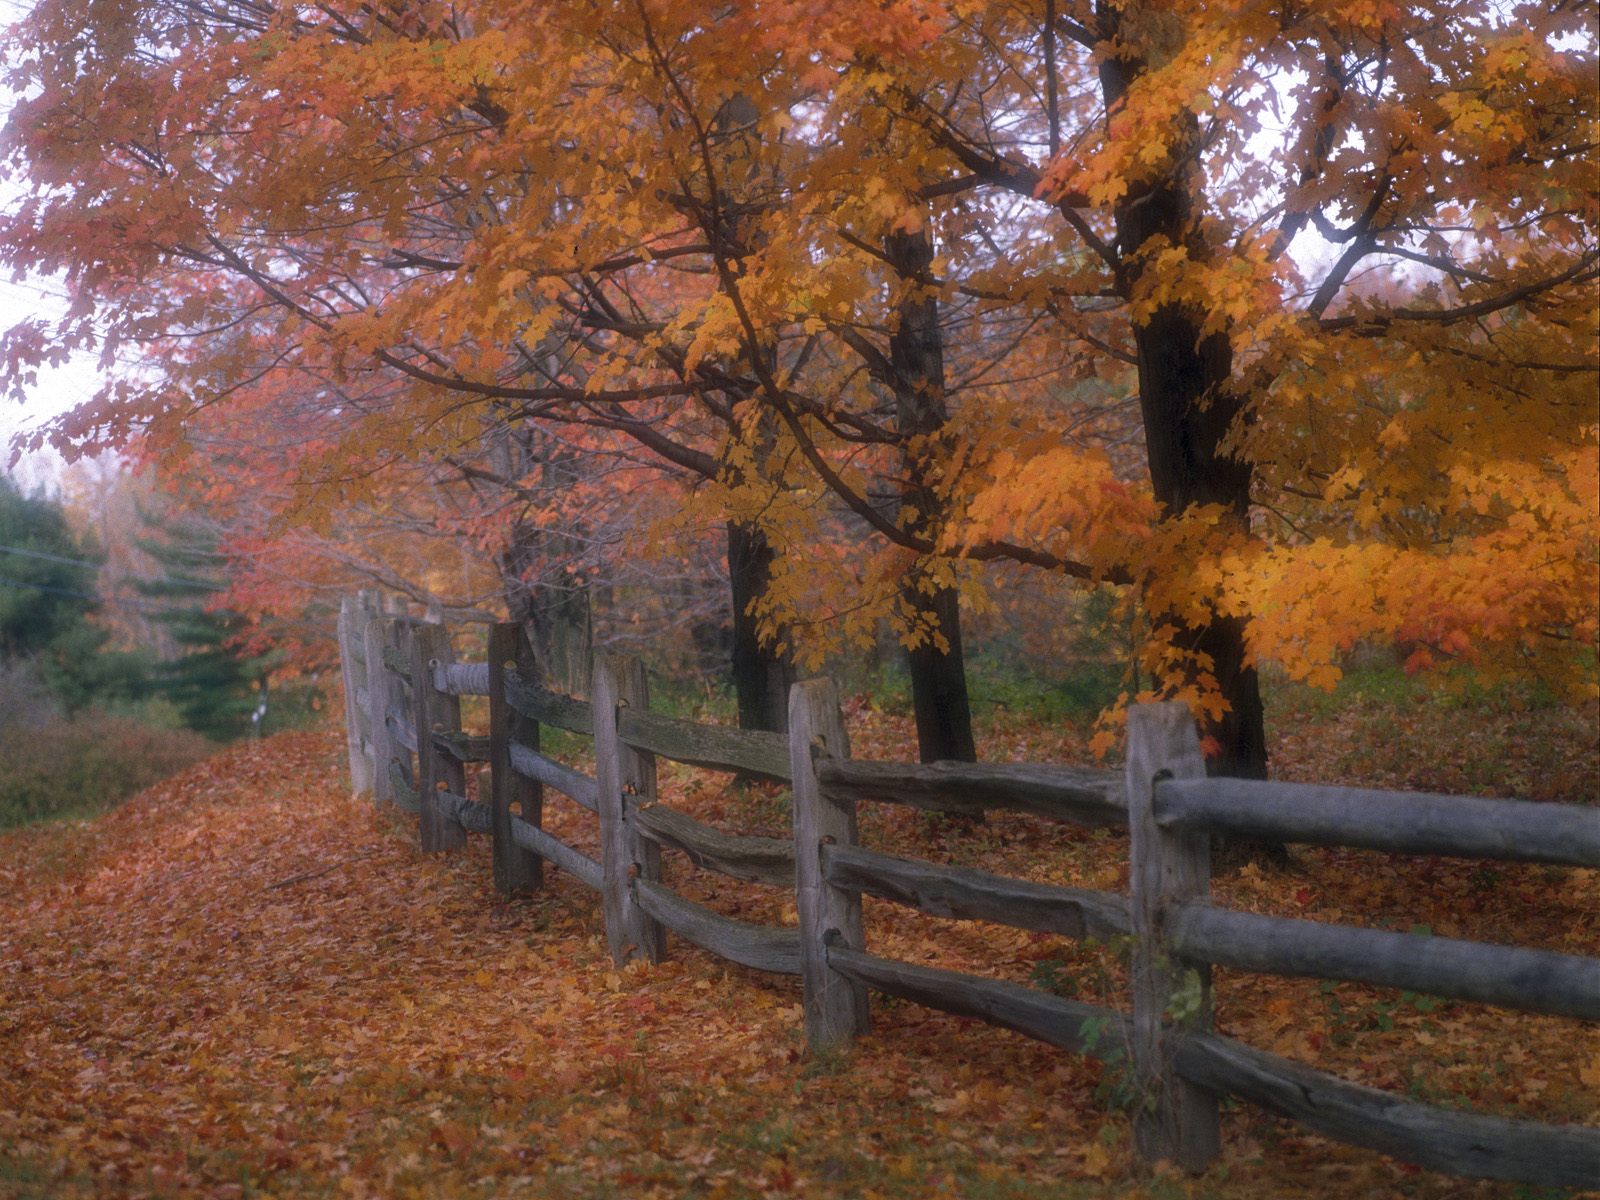 Country Fence Wallpaper Desktop Full Hd - Fall Trees With A Wooden Fence - HD Wallpaper 